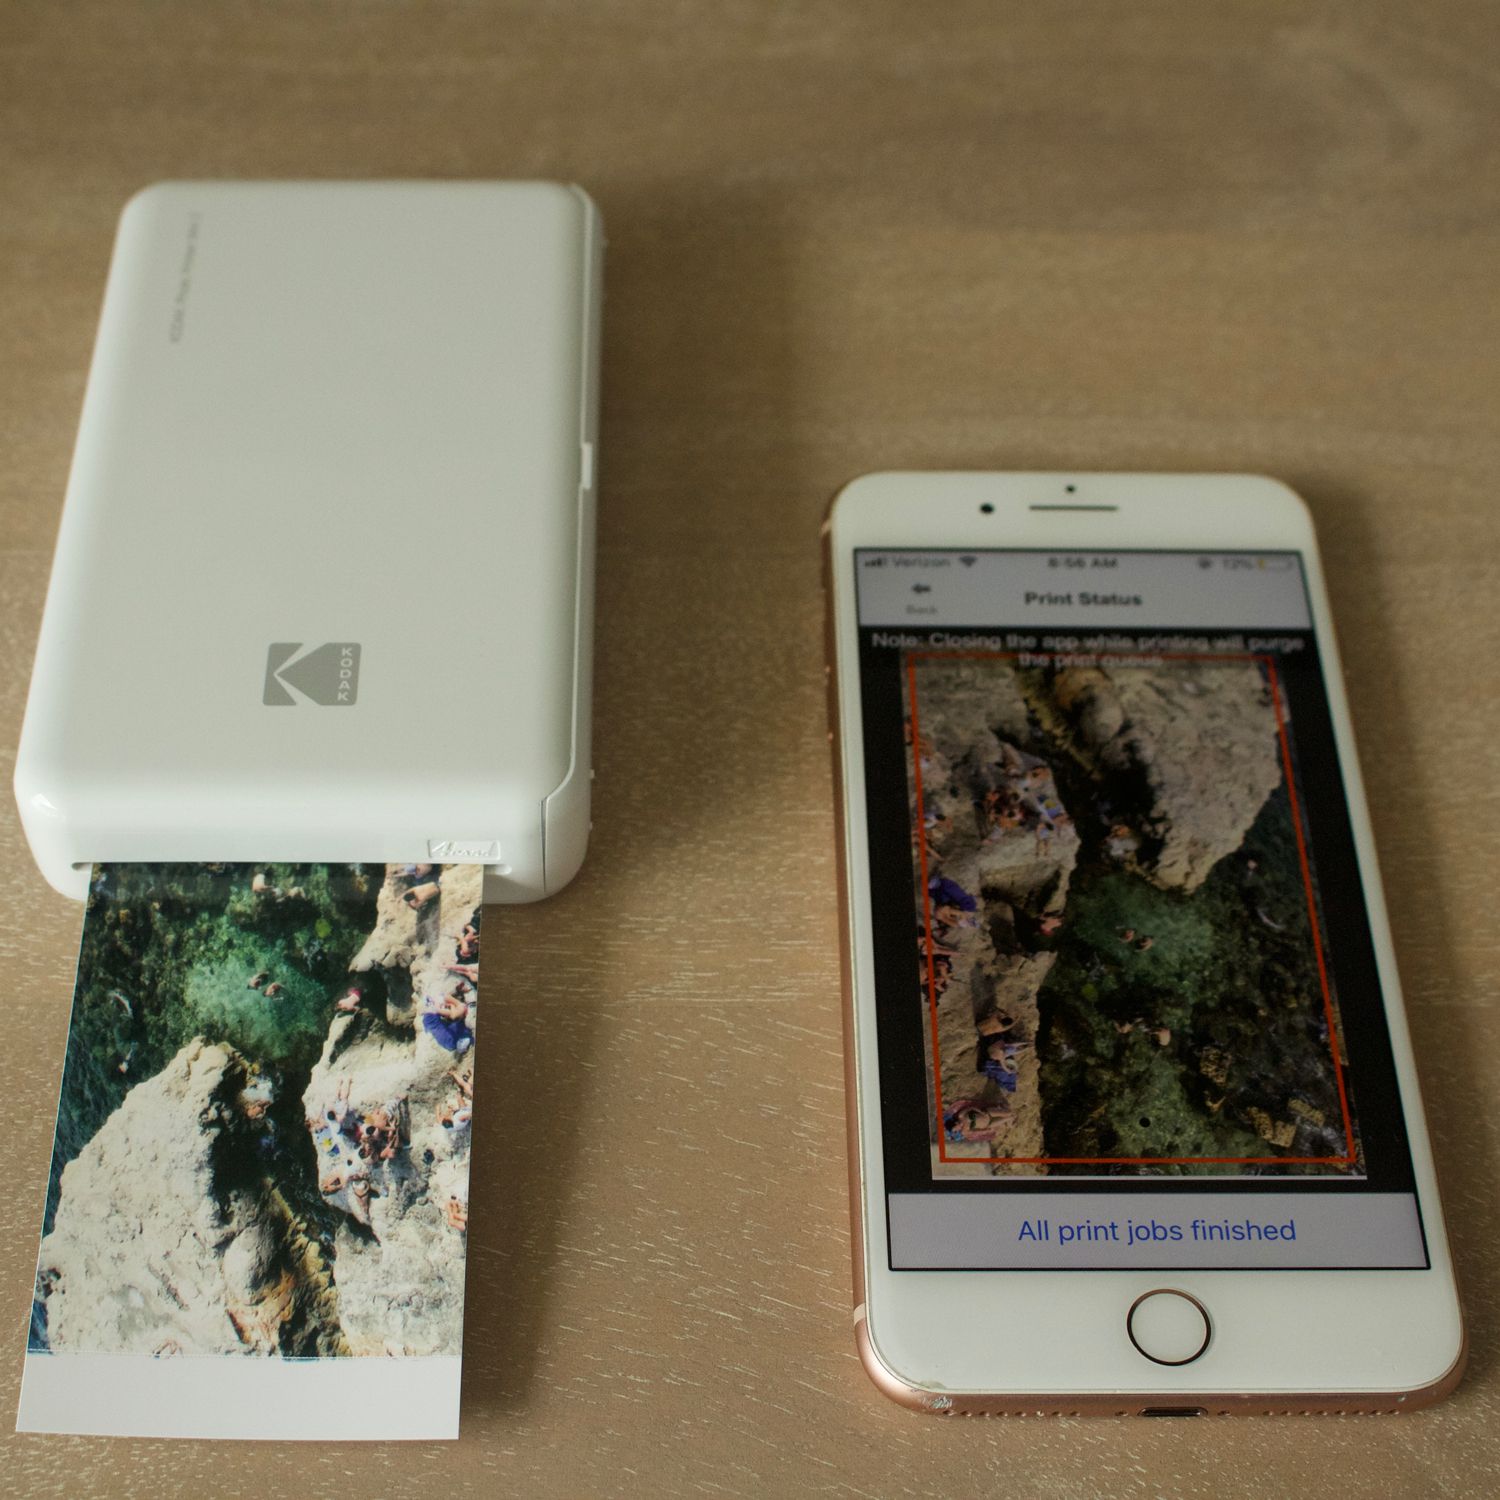 The best handy photo printer for ease of use